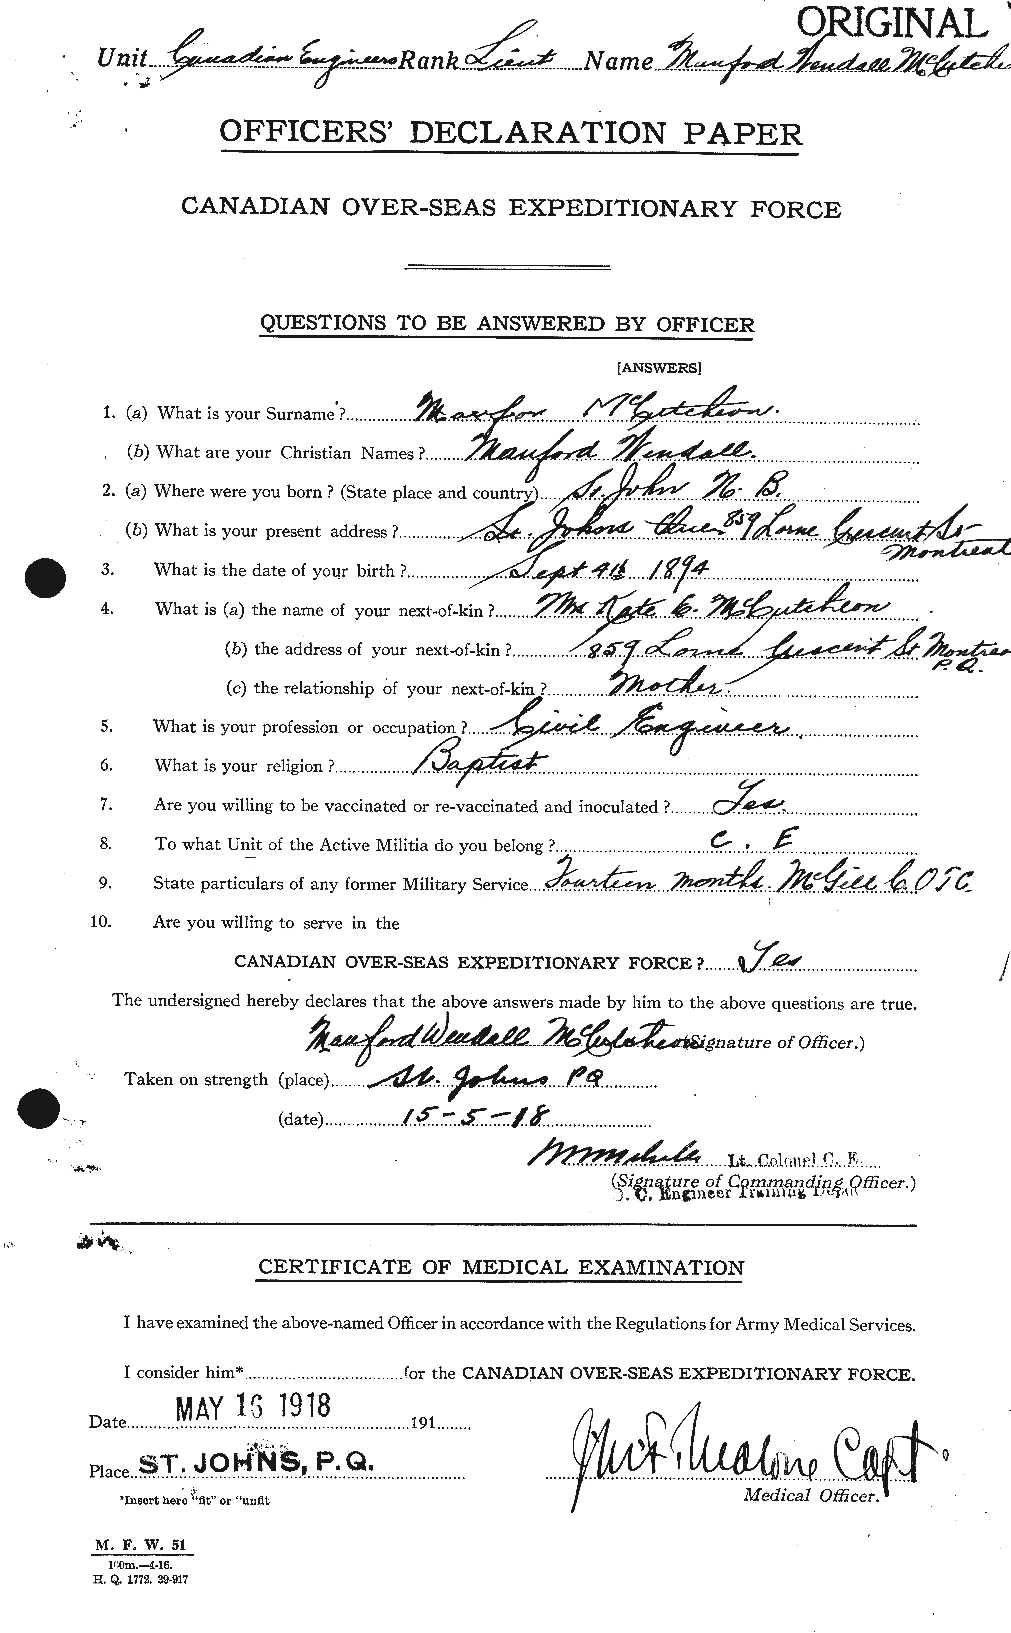 Personnel Records of the First World War - CEF 136763a